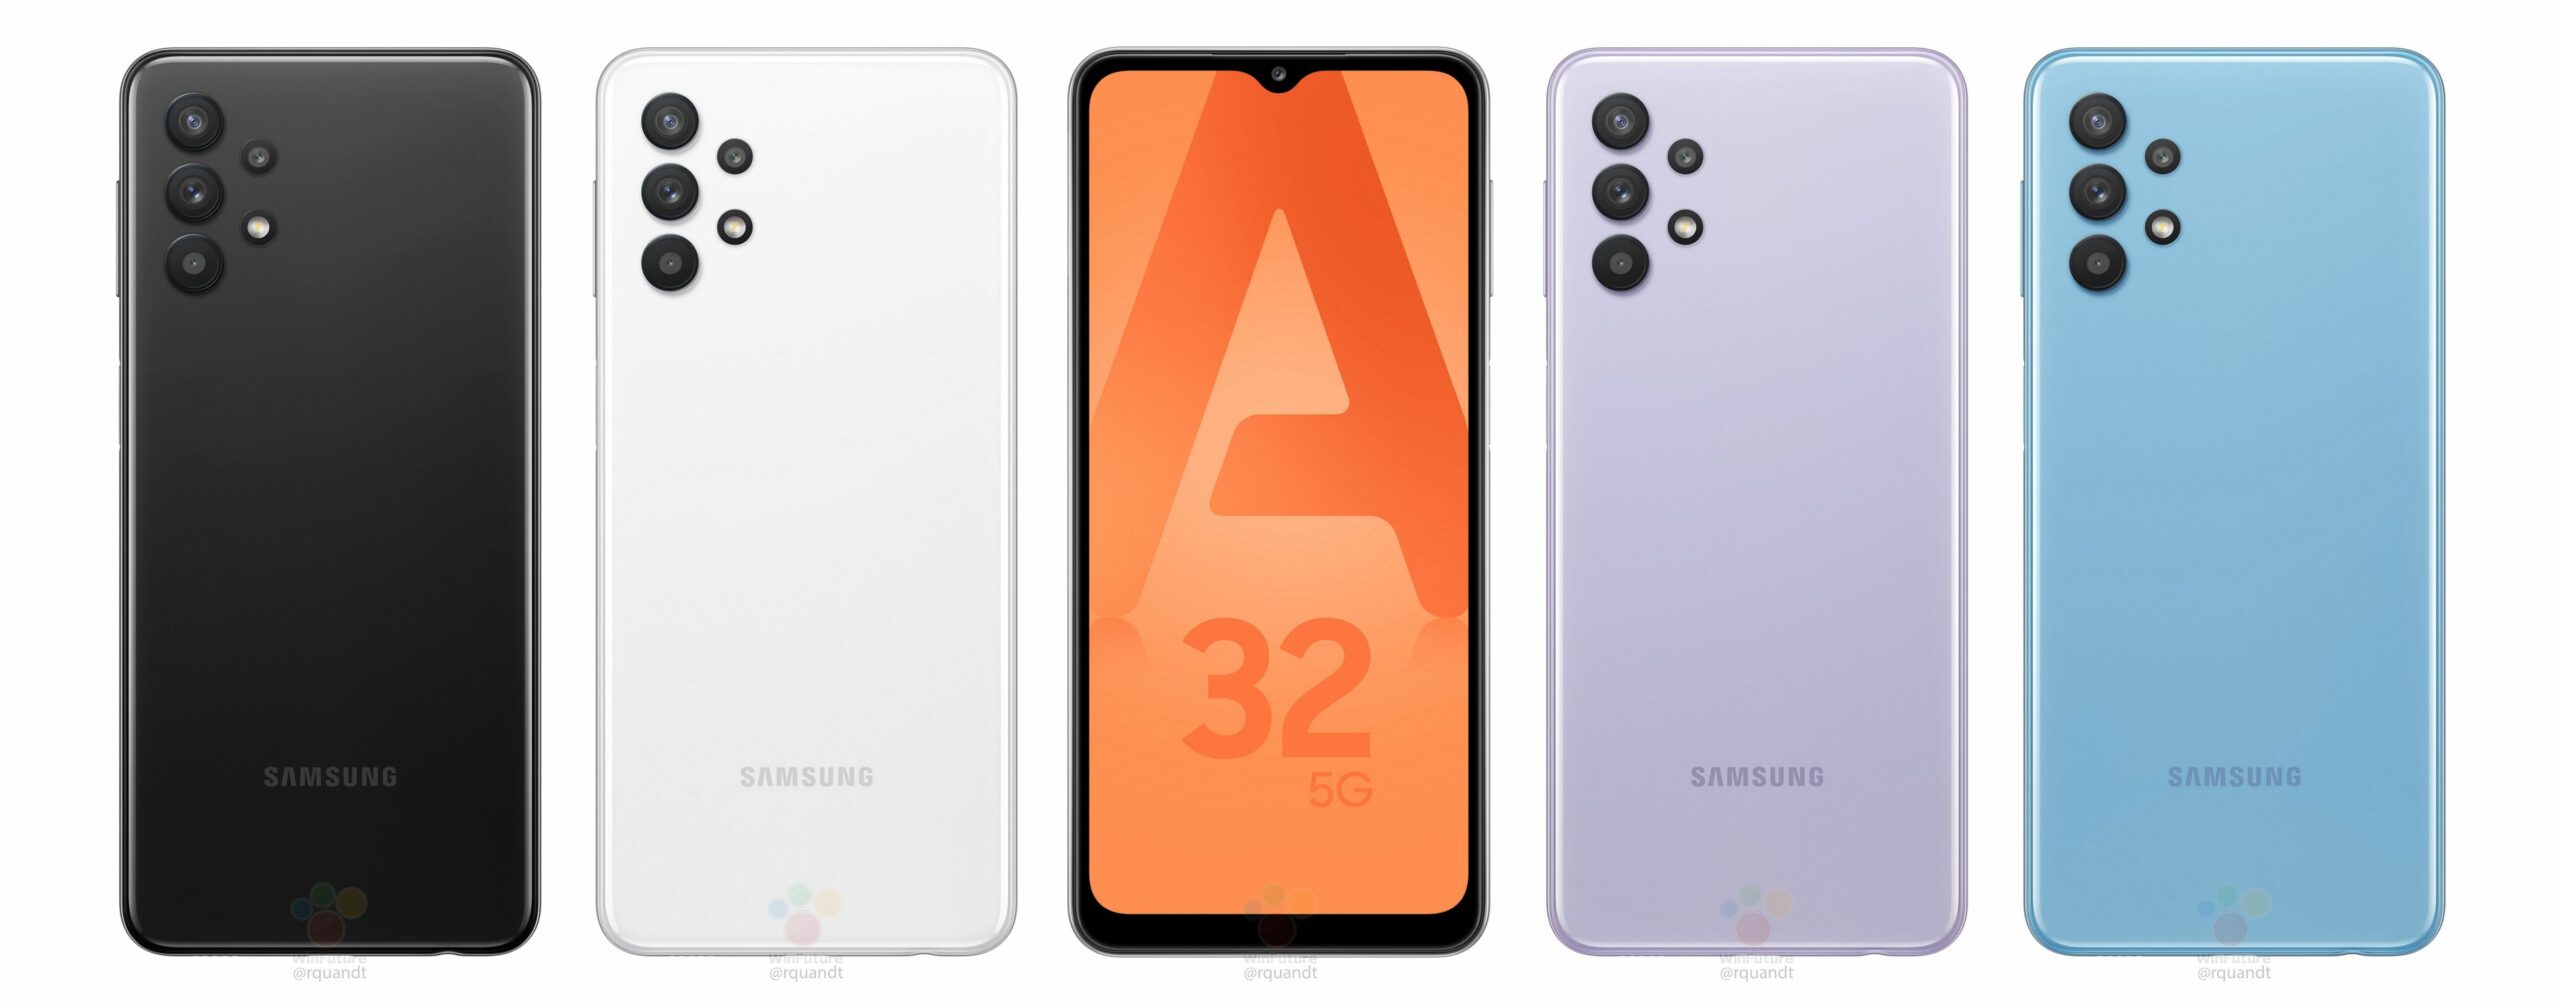 Samsung Galaxy A32 5G front and rear